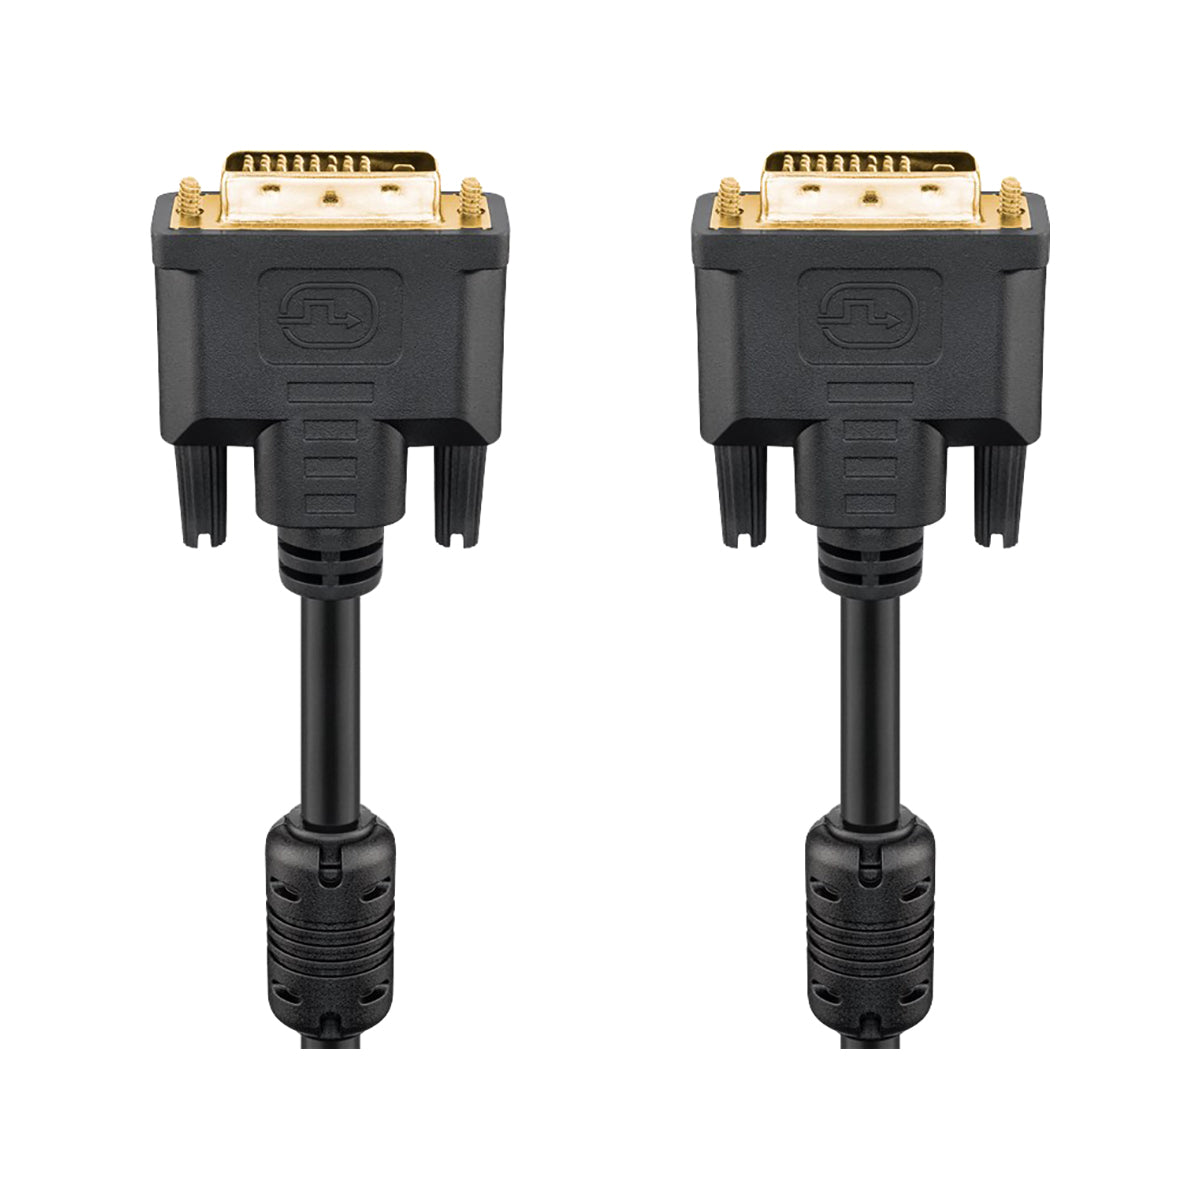 DVI-D Full HD Cable Dual Link, Gold-Plated Cable 15 m for Monitors/Projectors